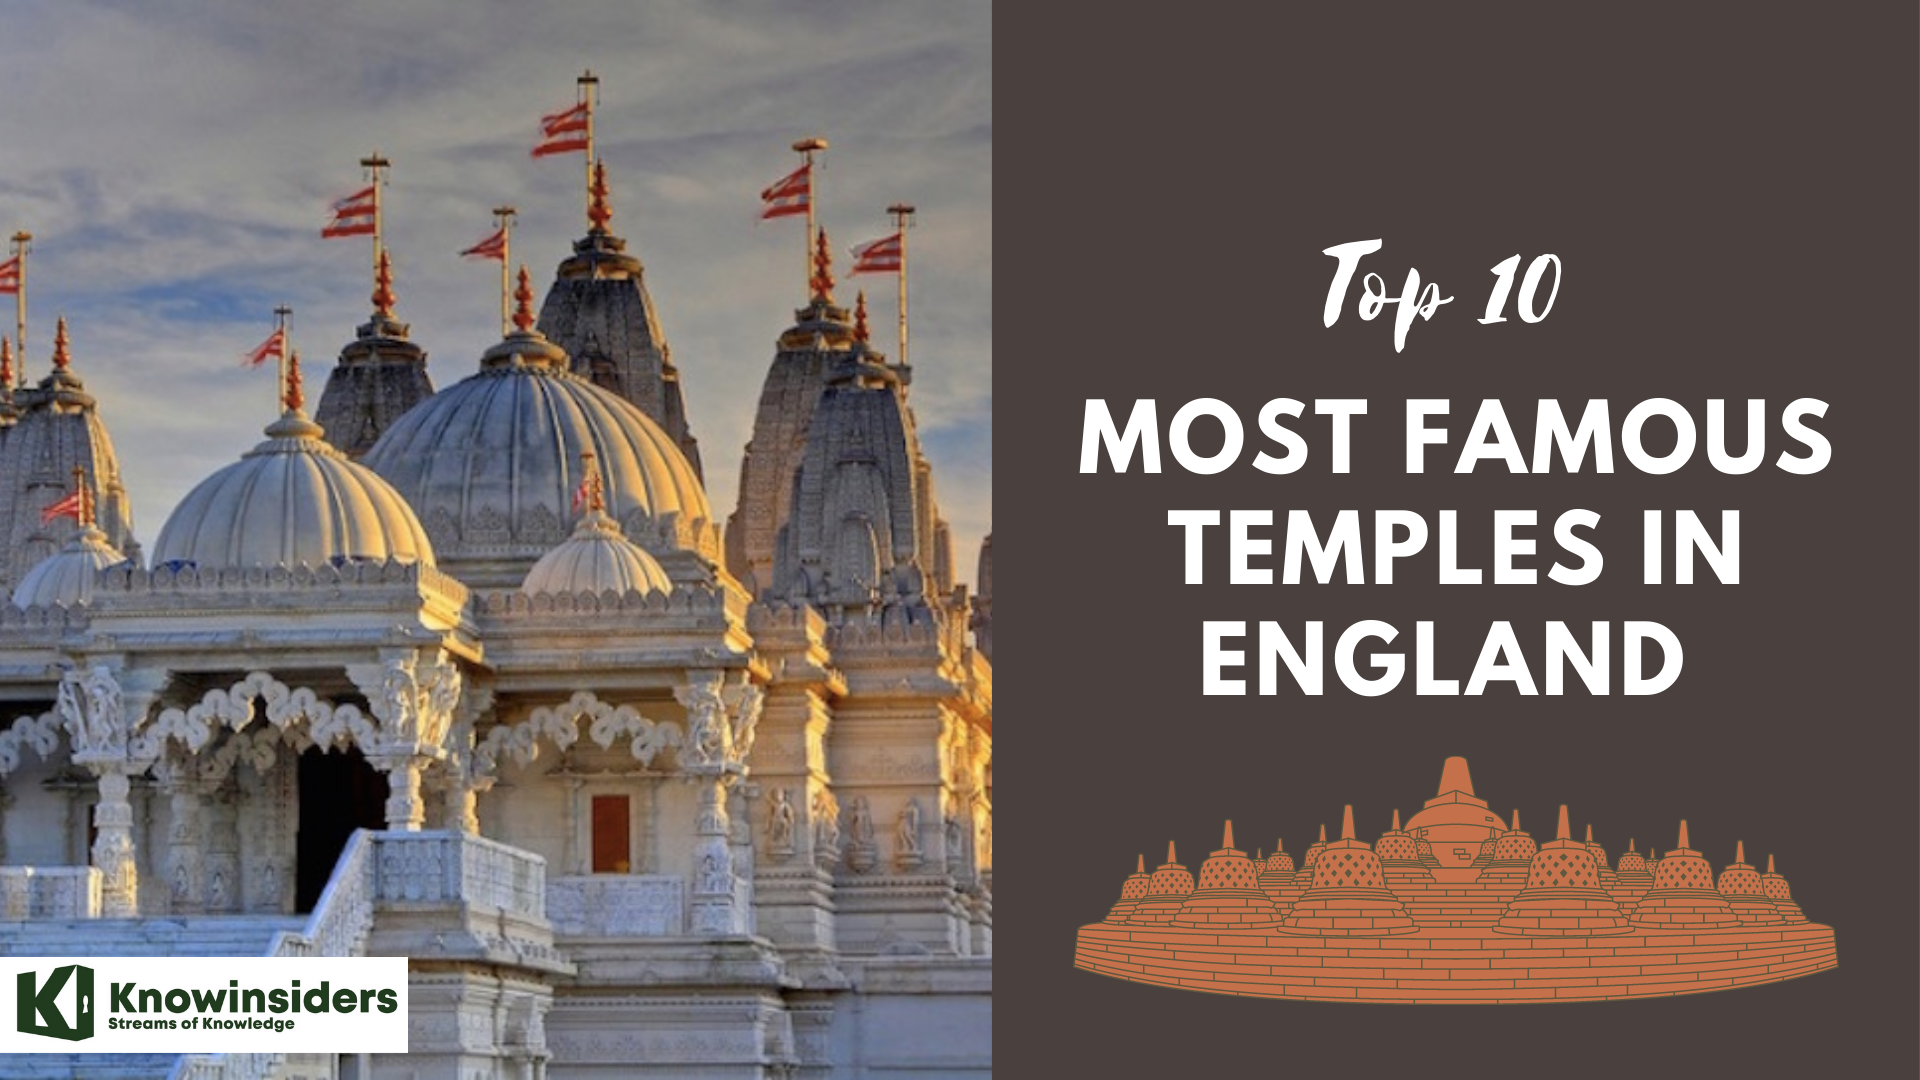 Top 10 Most Famous Temples in England